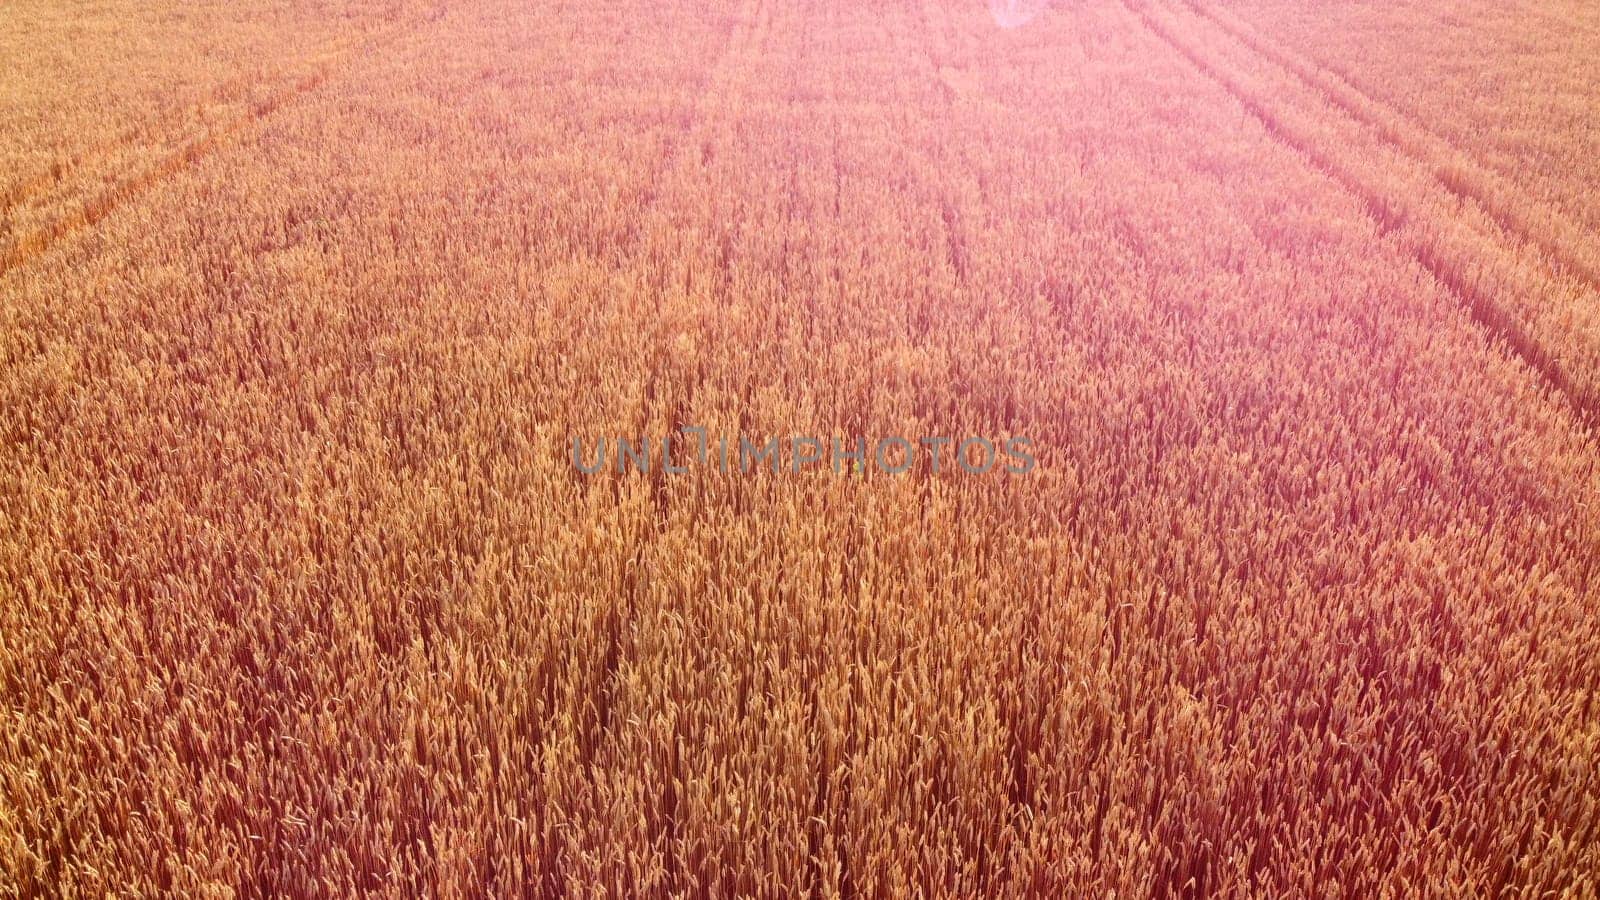 Flying over field of yellow ripe wheat, dawn sunset. Sun glare. Natural background. Rural countryside scenery. Agricultural landscape. Aerial drone view flight over ears of wheat grains. Highlight